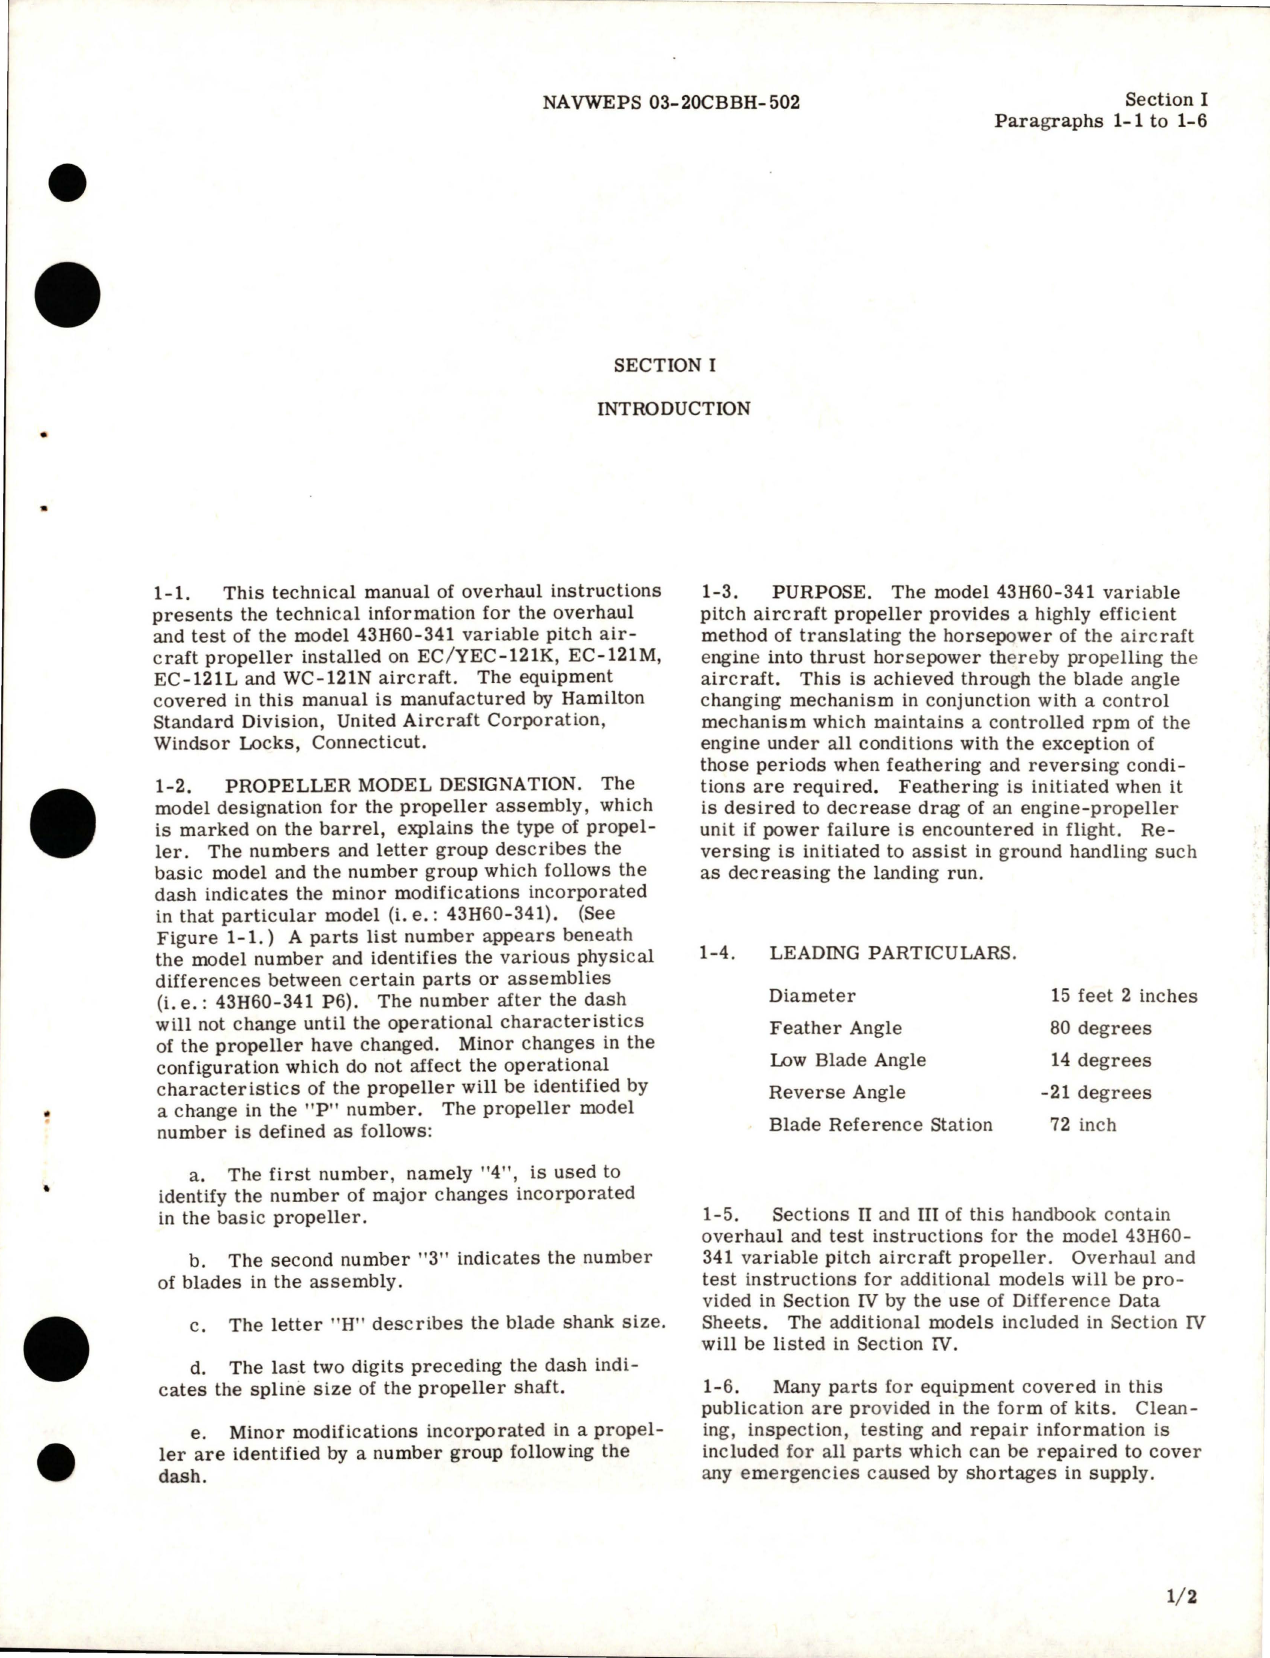 Sample page 5 from AirCorps Library document: Overhaul Instructions for Variable Pitch Propeller - Model 43H60-341